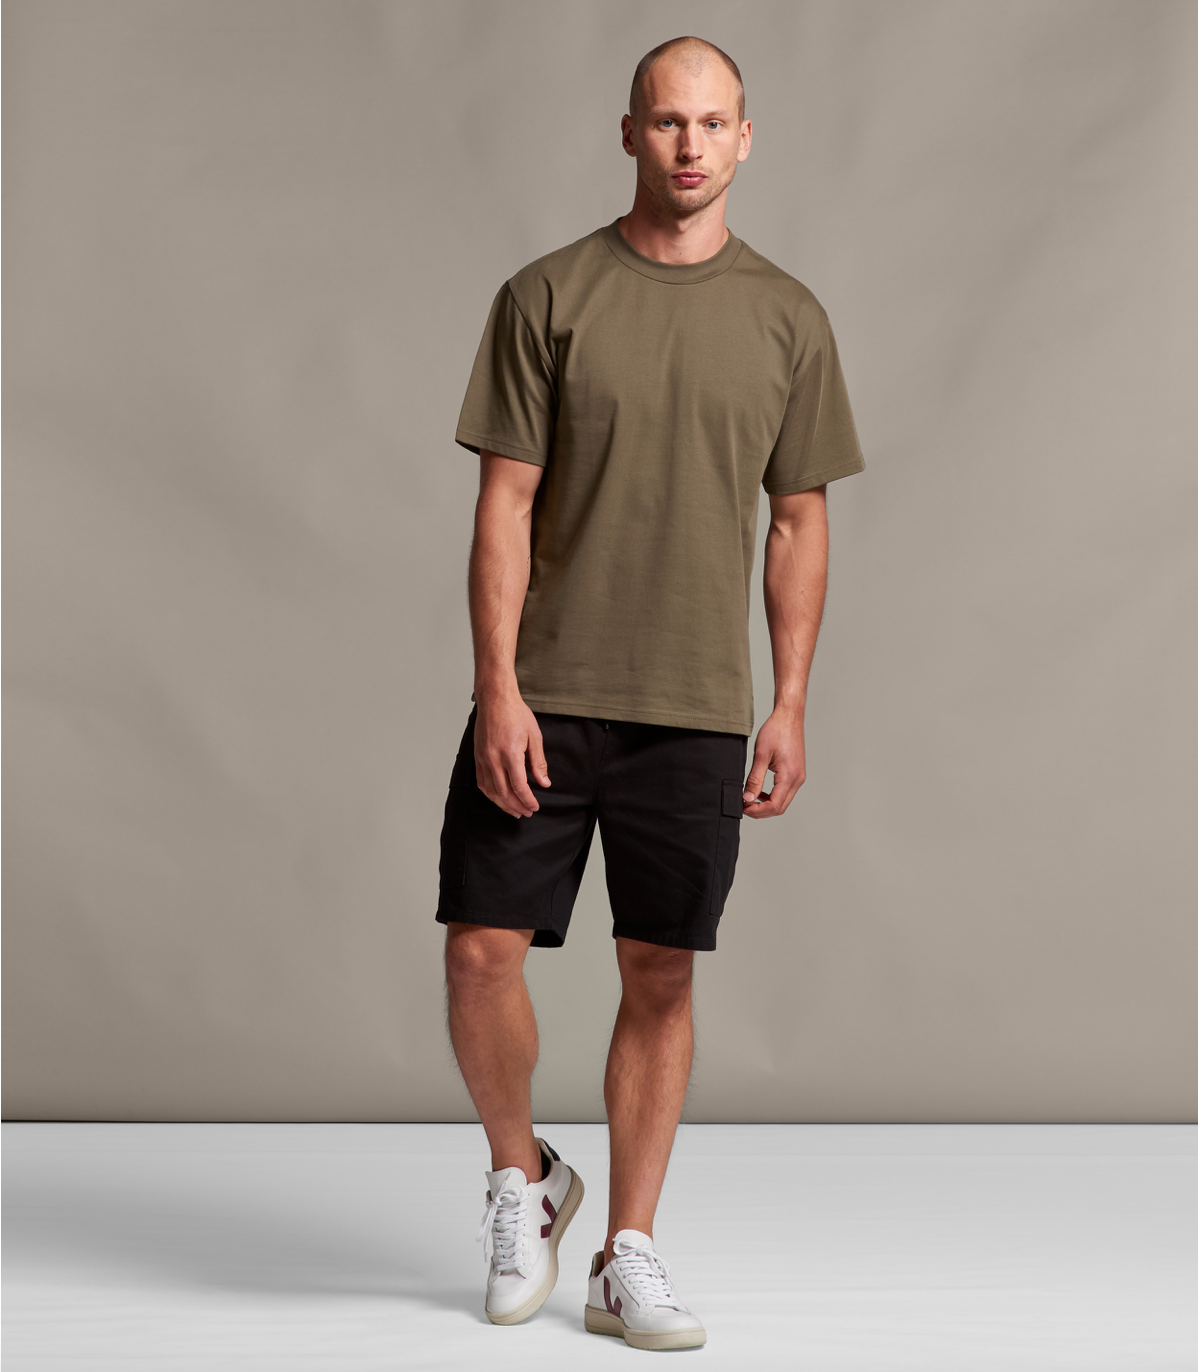 Heavy Tee | AS Colour T Shirt | Branded T Shirts